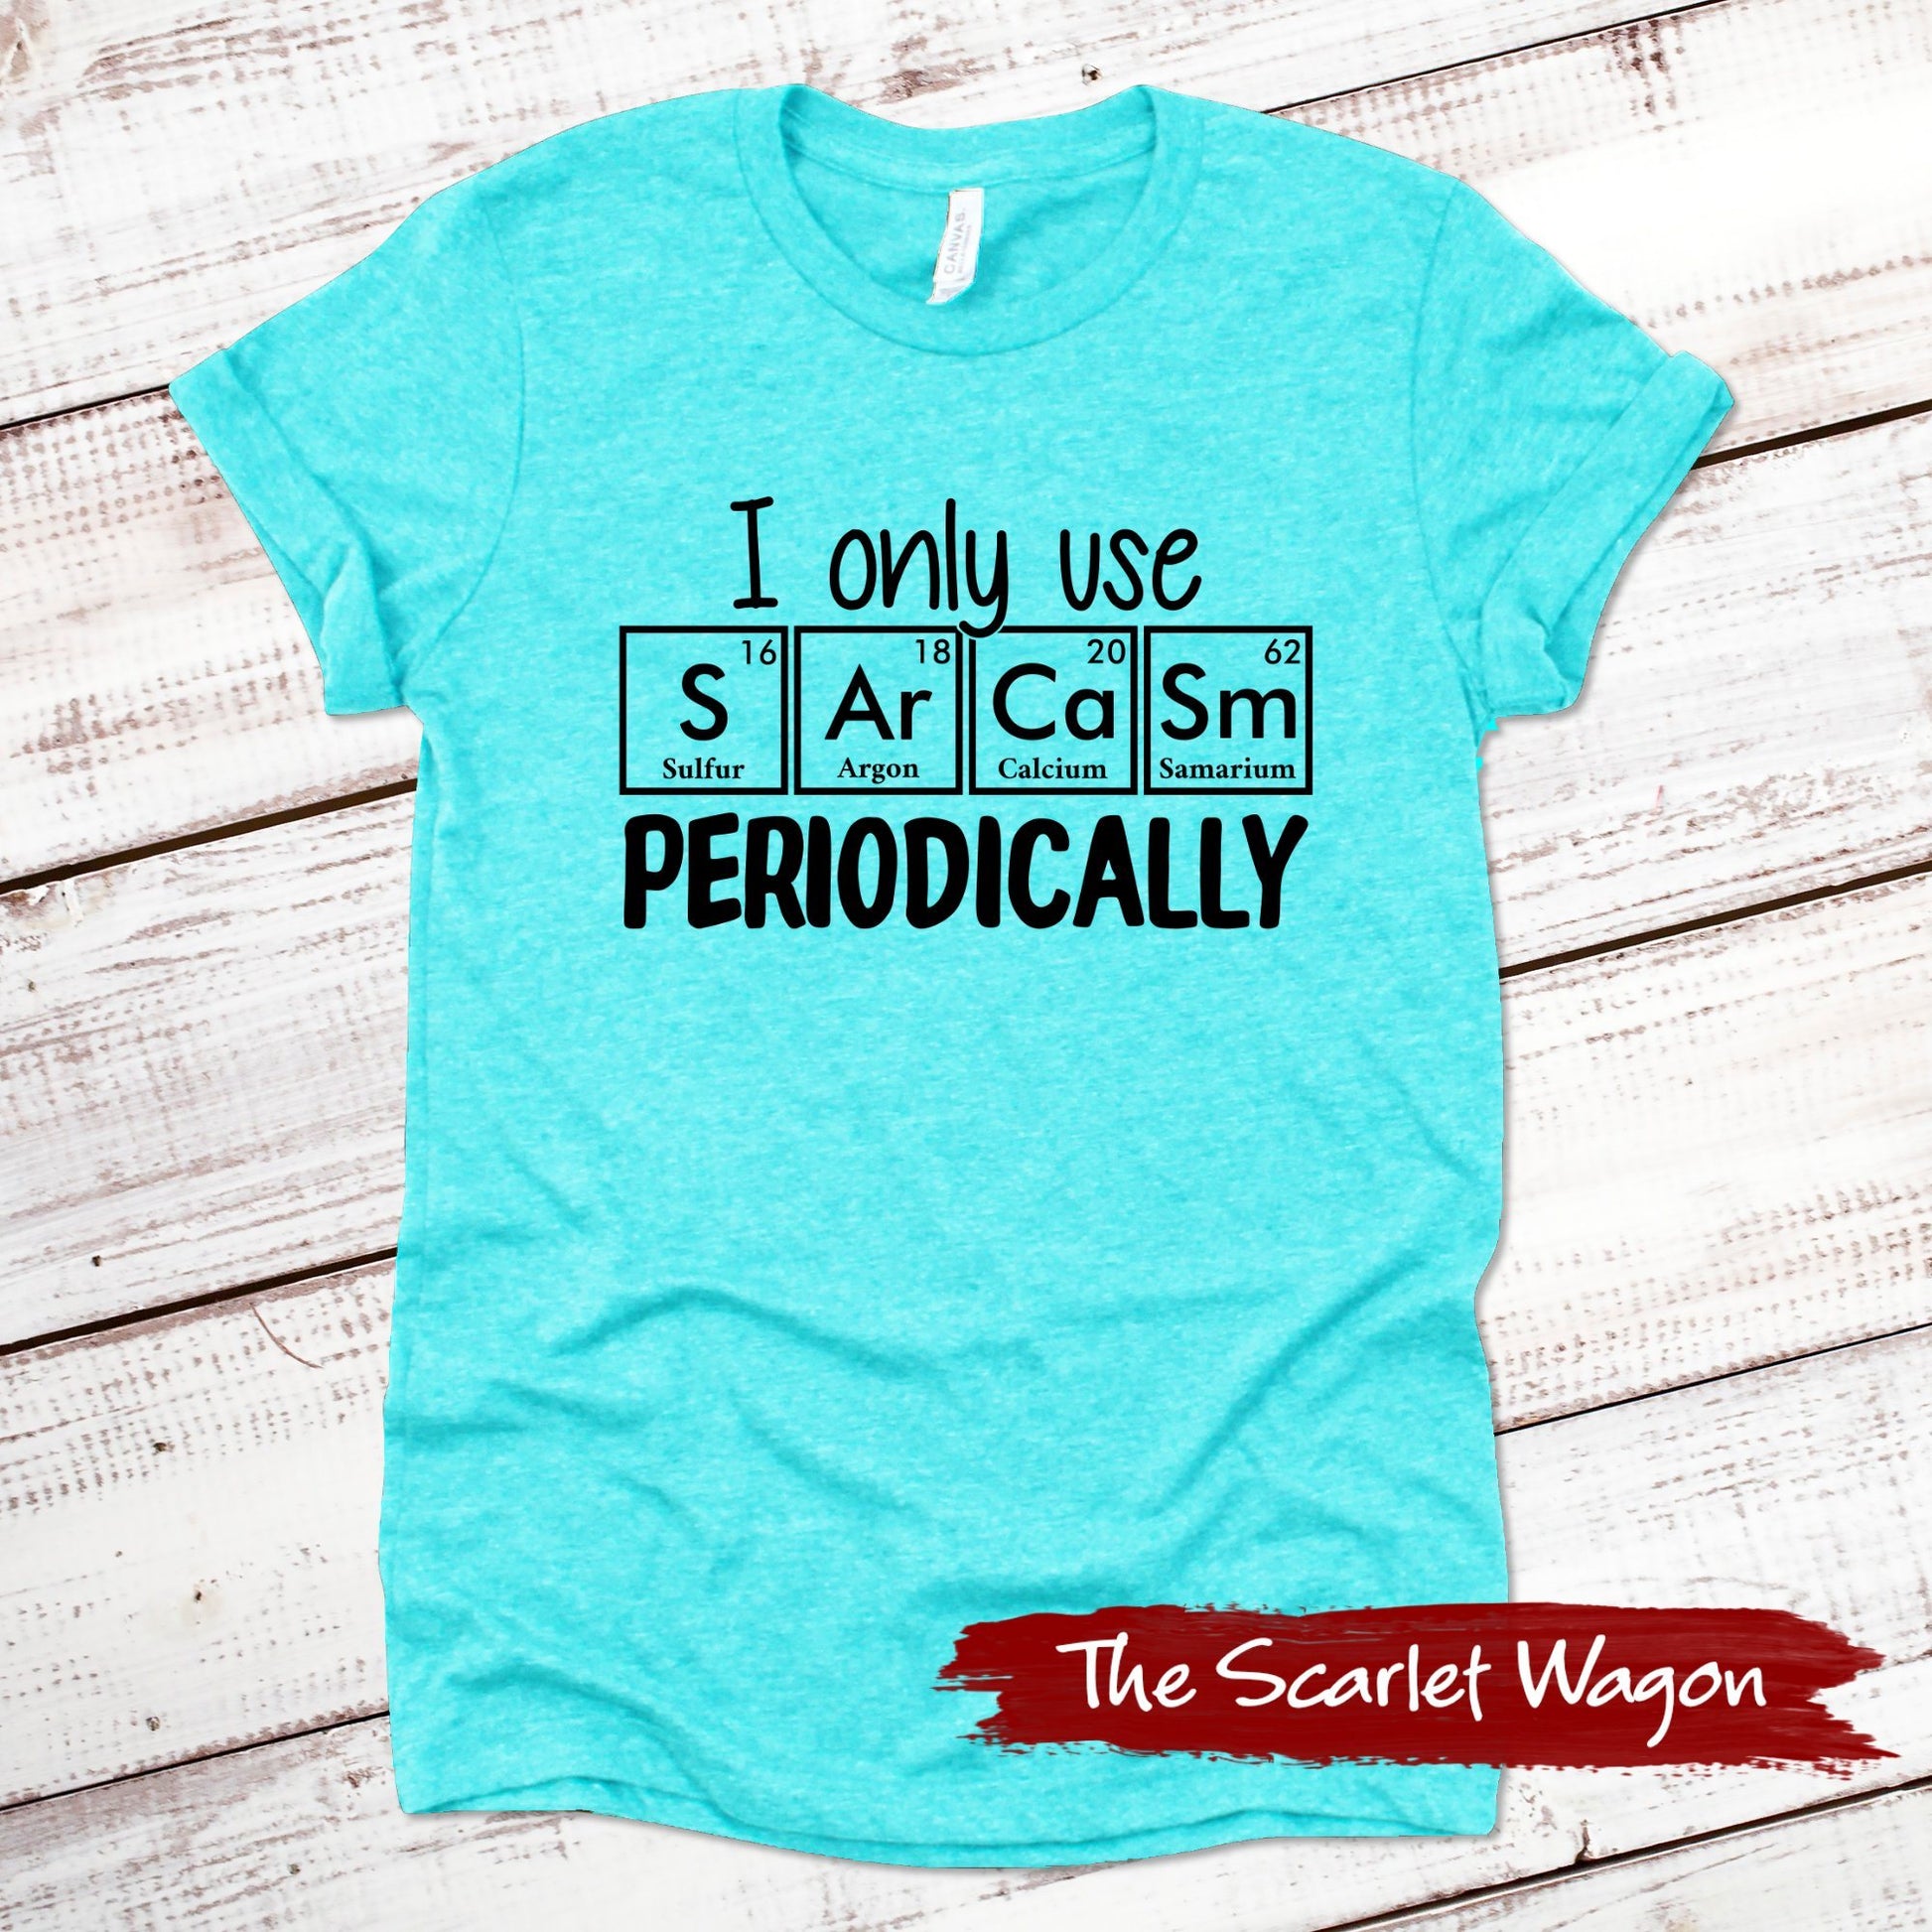 I Only Use Sarcasm Periodically Funny Shirt Scarlet Wagon Heather Teal XS 